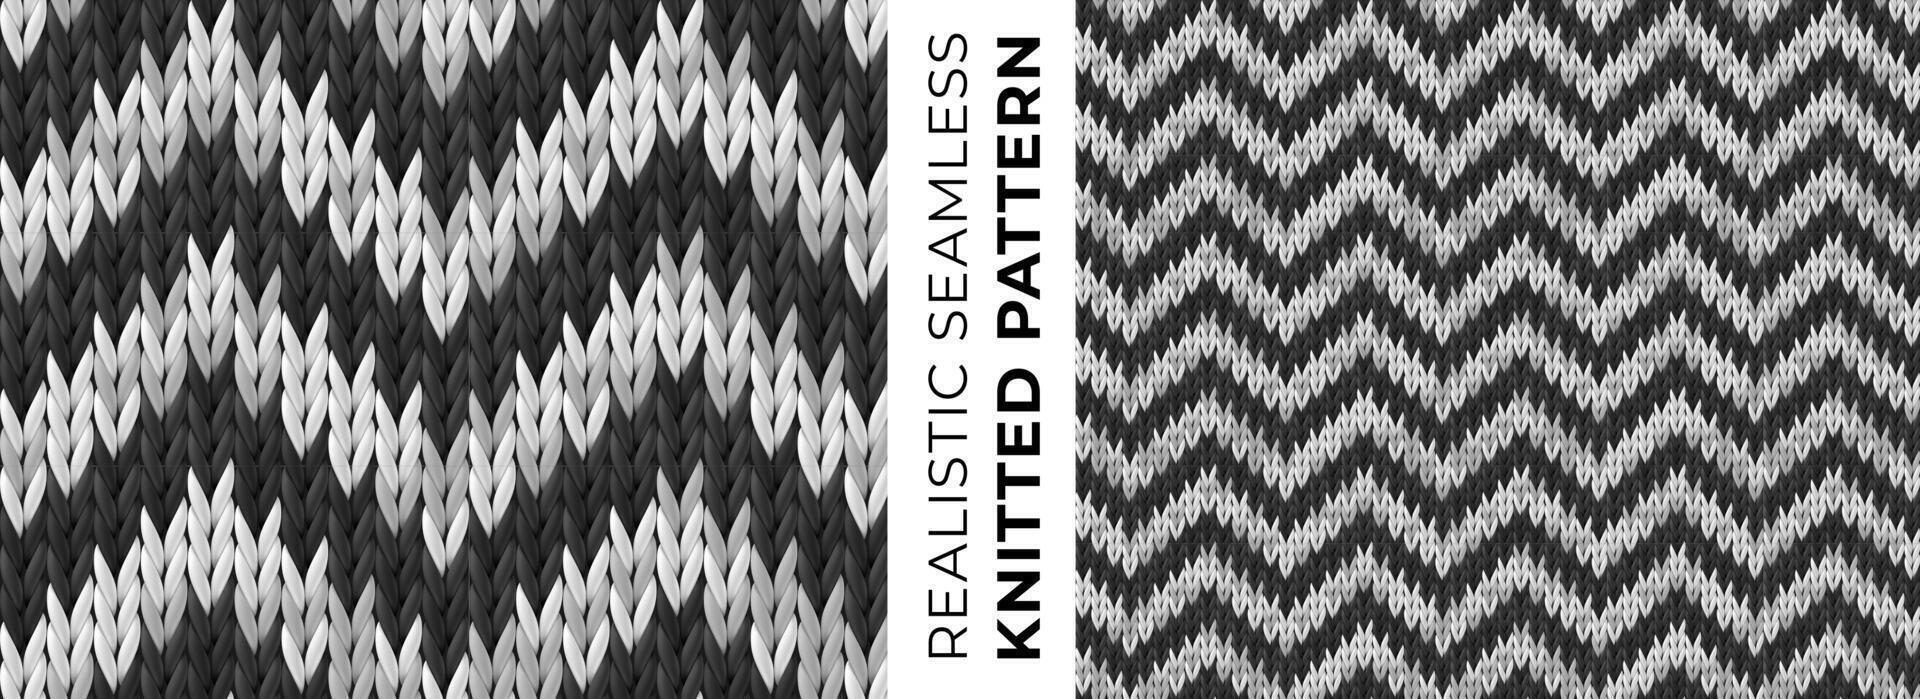 Realistic chevron seamless knitted pattern. Detailed zigzag ornament. Texture of monochrome knitwear for background, wallpaper, wrapping paper, website backdrop, winter design. Vector illustration.